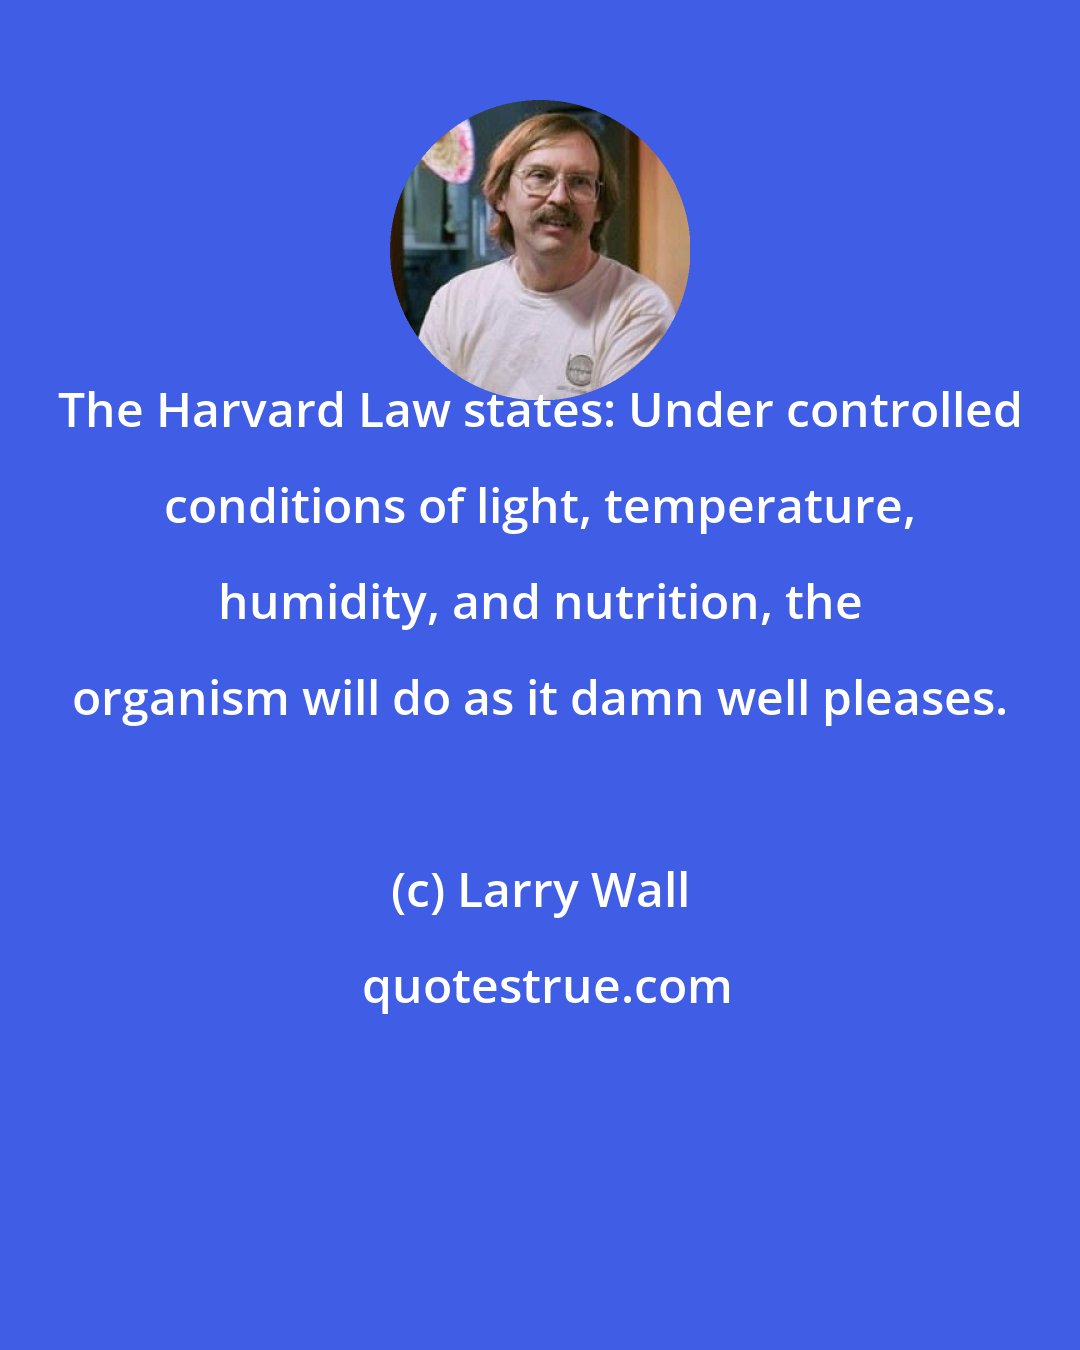 Larry Wall: The Harvard Law states: Under controlled conditions of light, temperature, humidity, and nutrition, the organism will do as it damn well pleases.